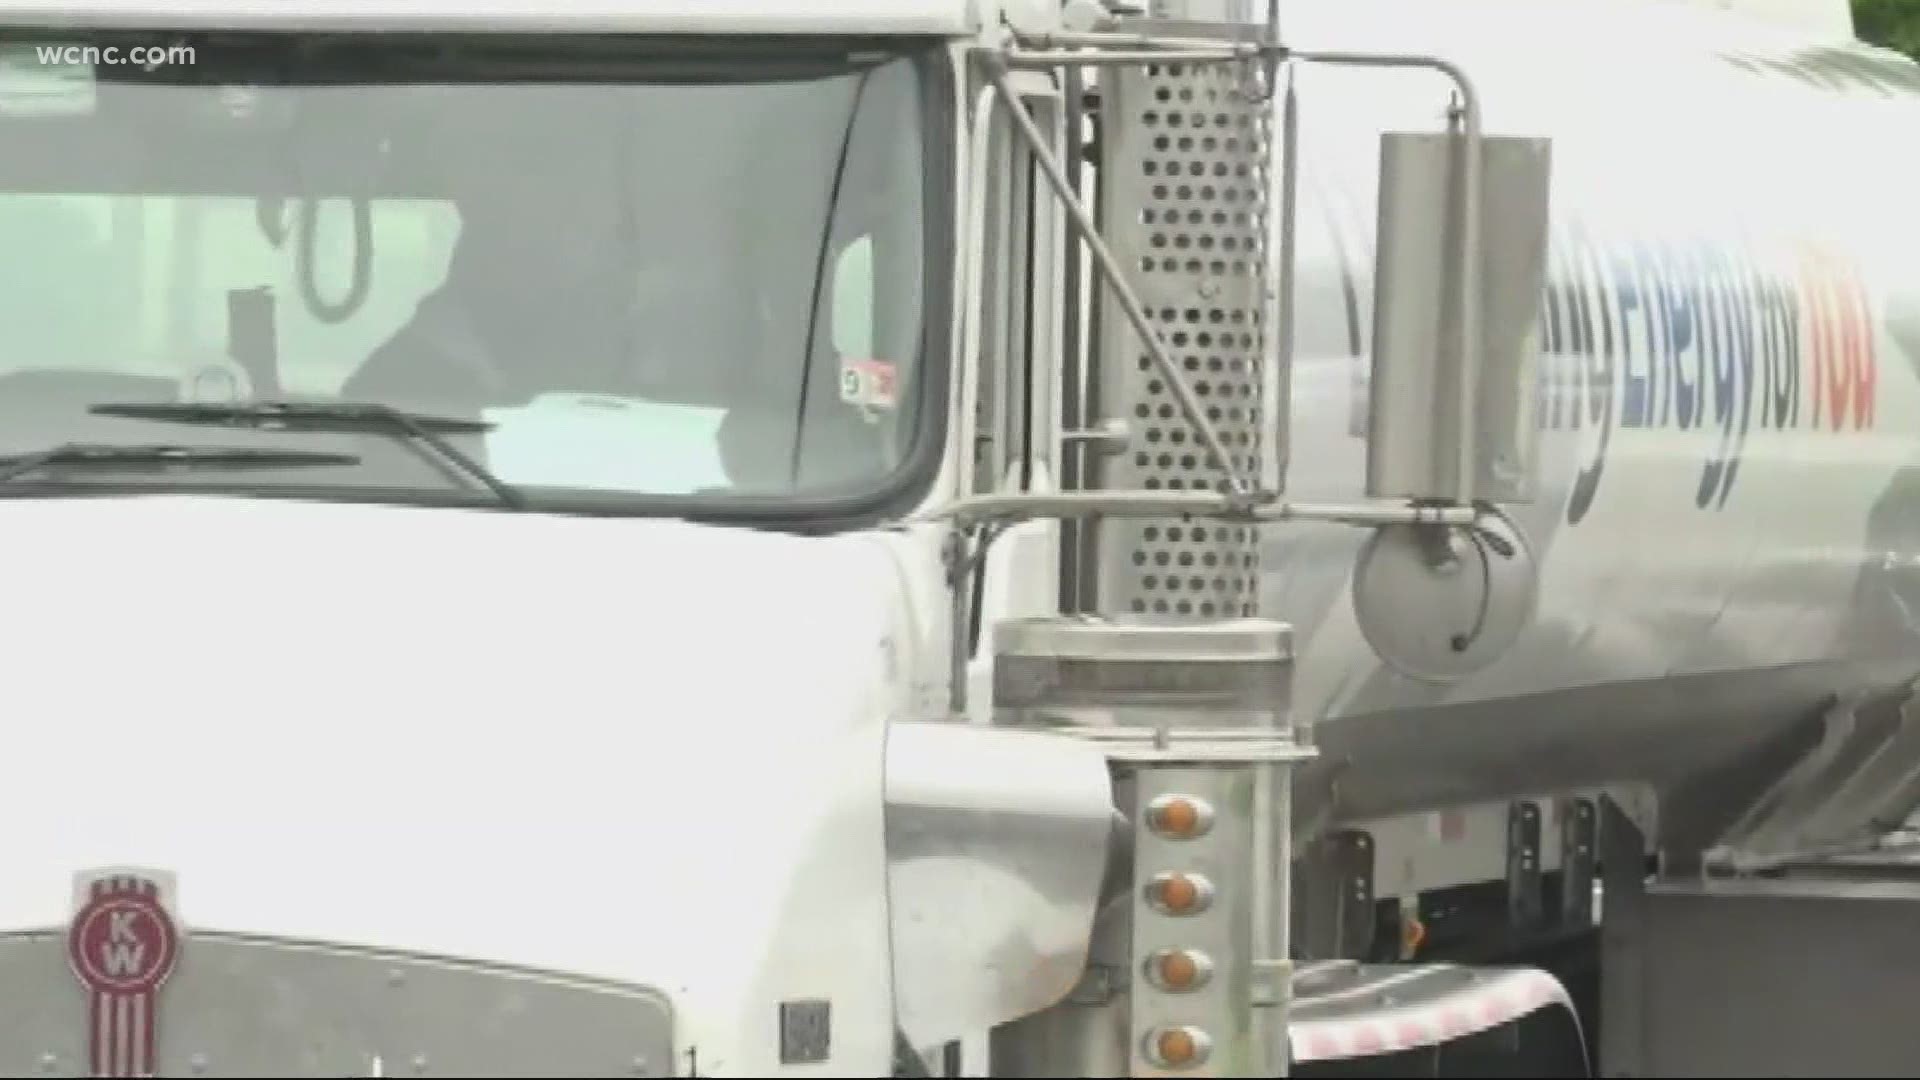 One Texas-based company is offering experienced drivers $14,000 a week.